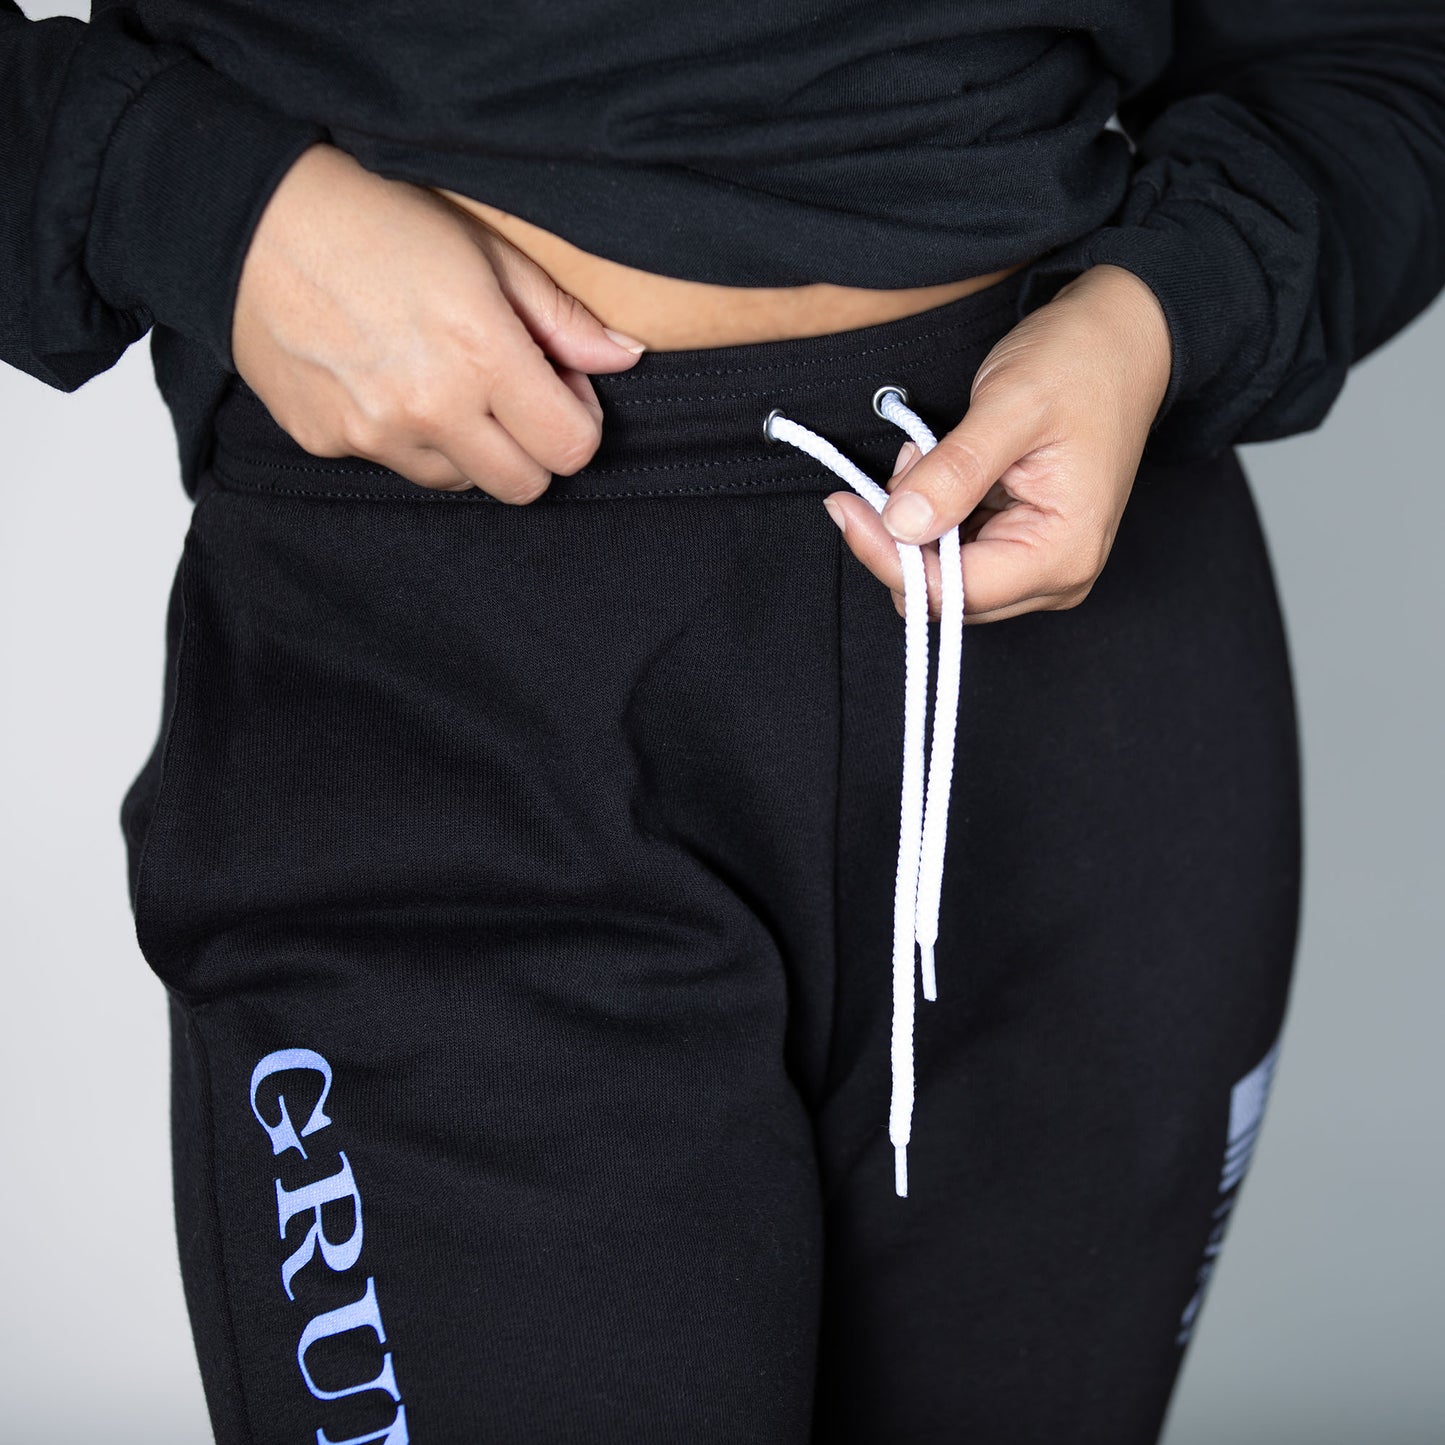 Women's Joggers for the Gym 